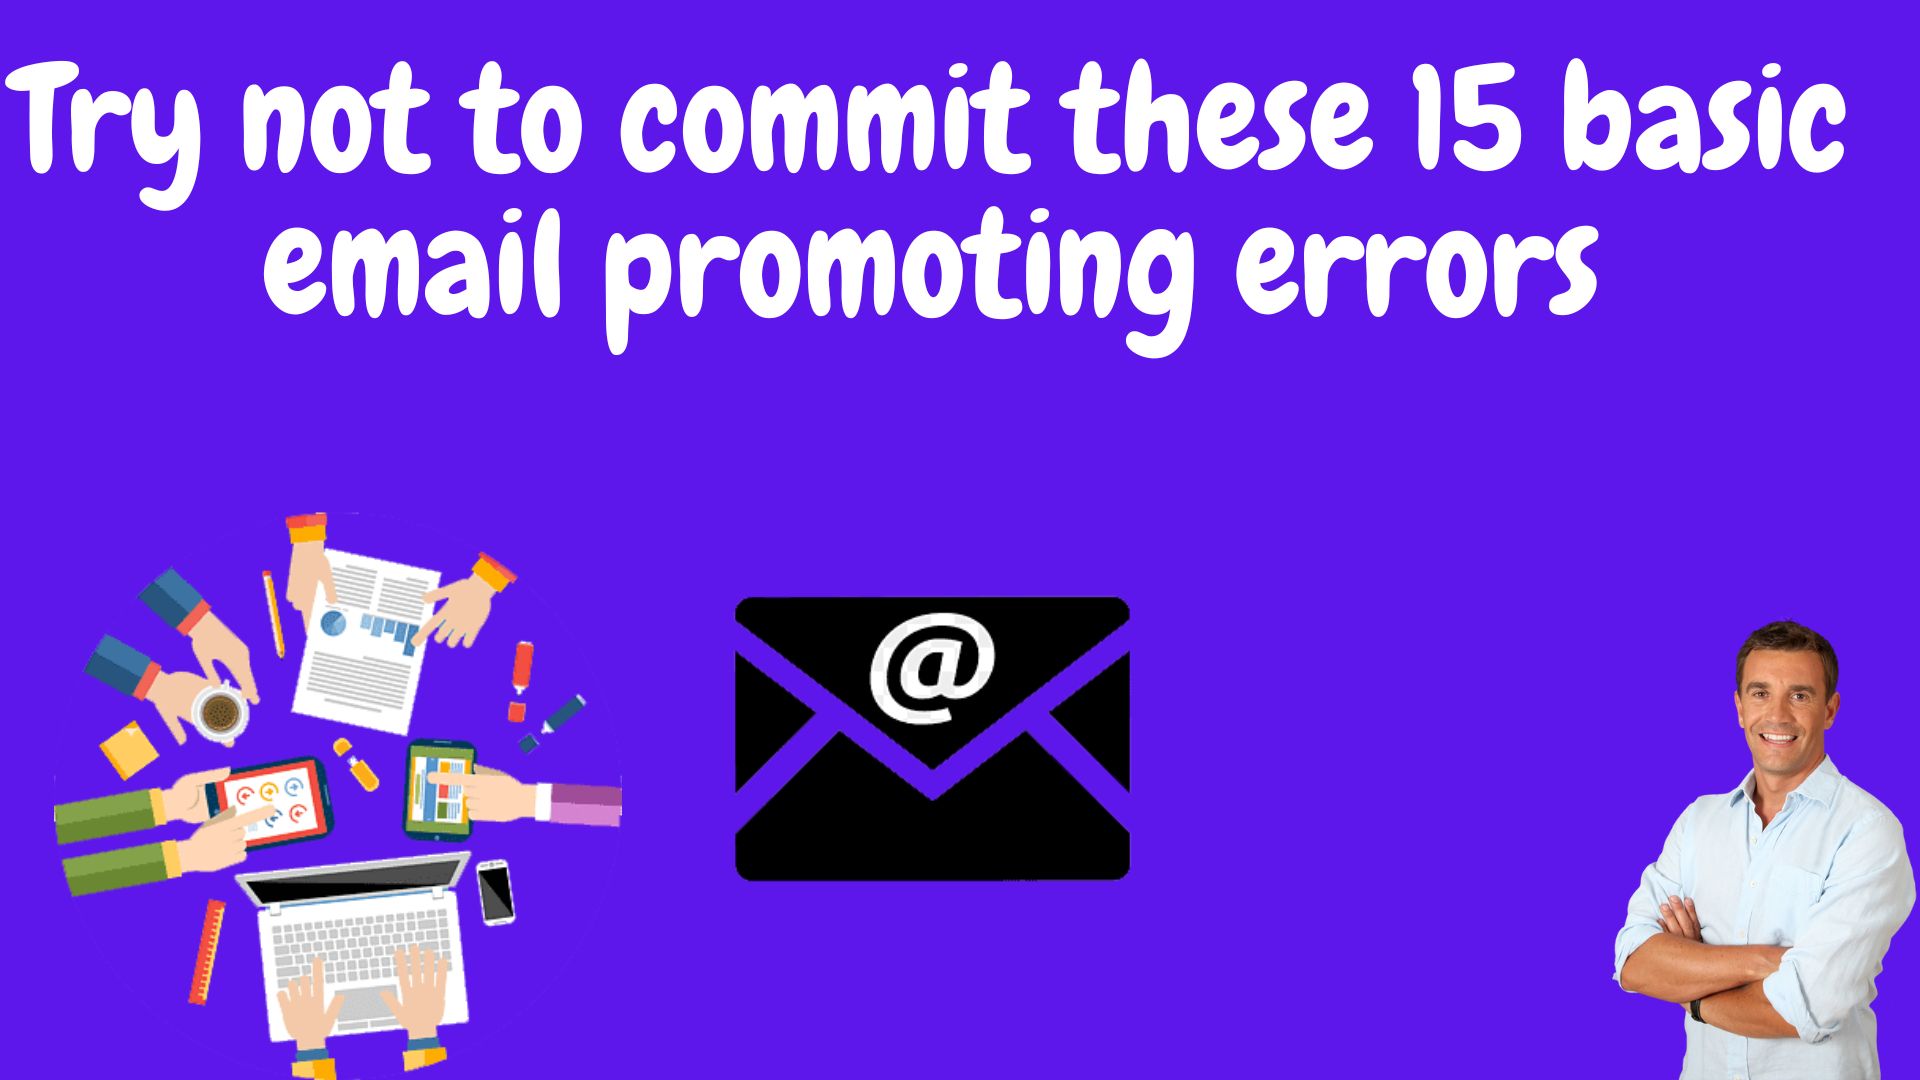 Try not to commit these 15 basic email promoting errors